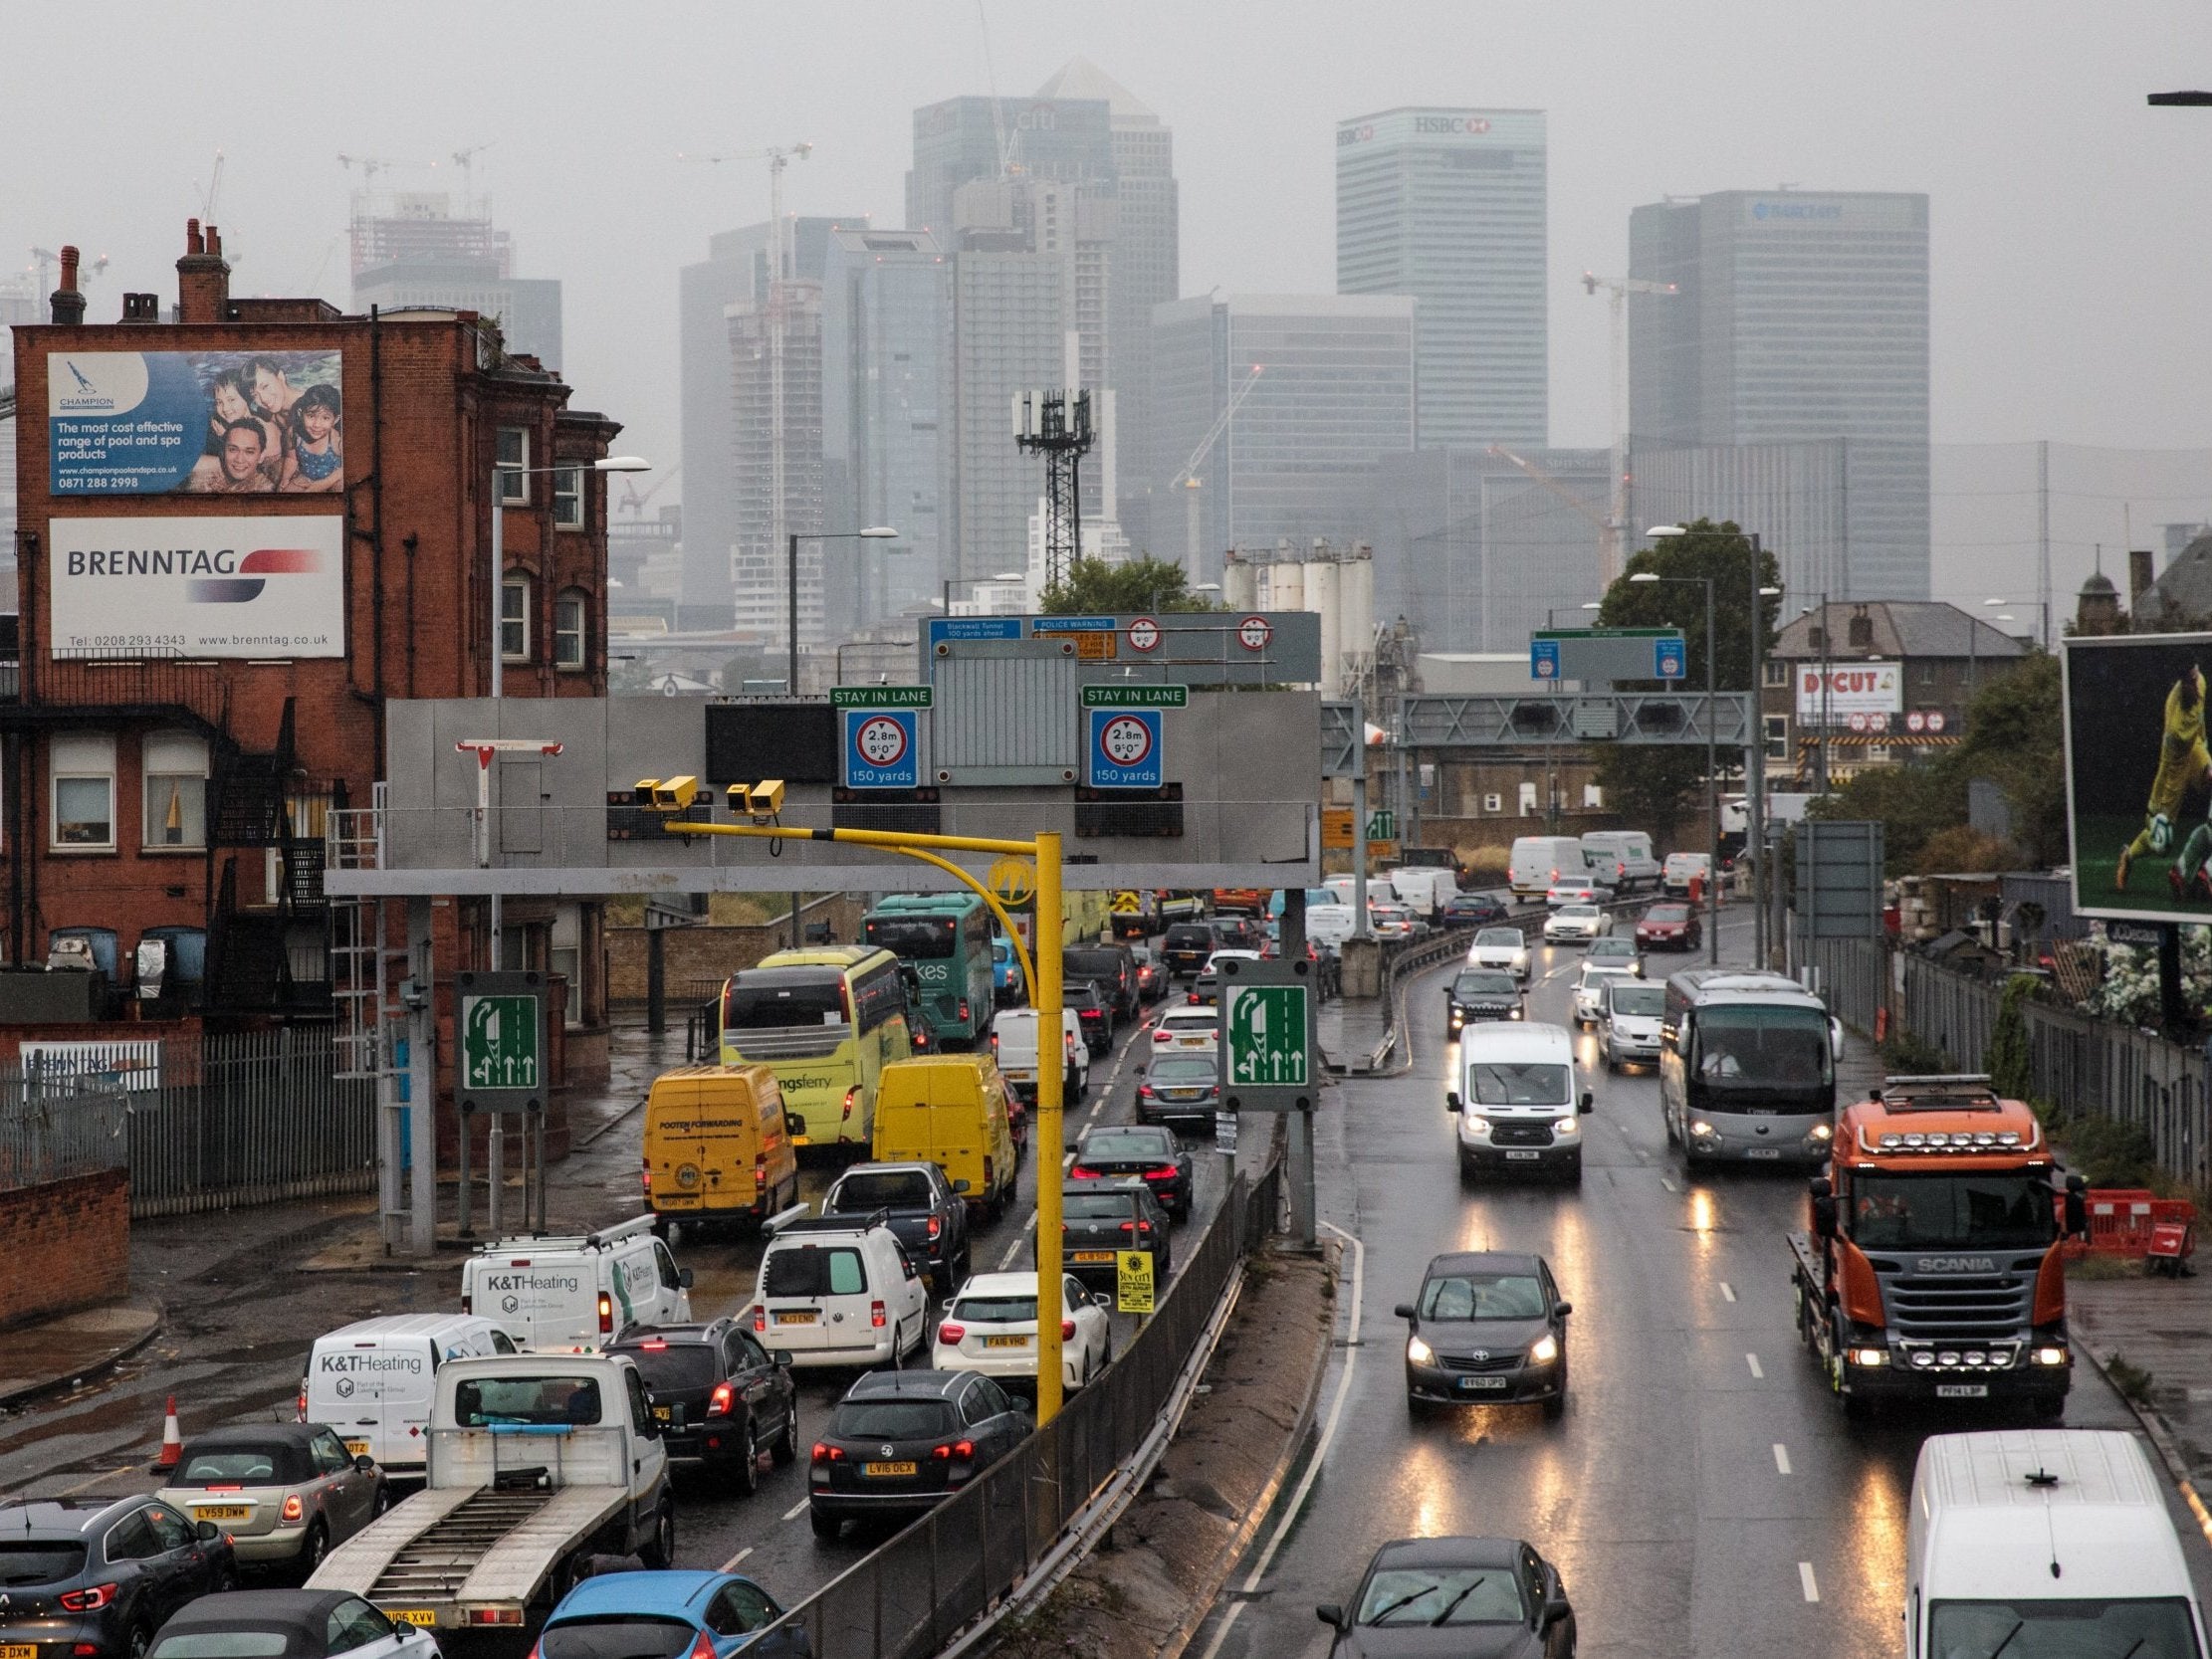 The study has led to calls for stricter ‘clean air’ policies to reduce the impact of pollution on health